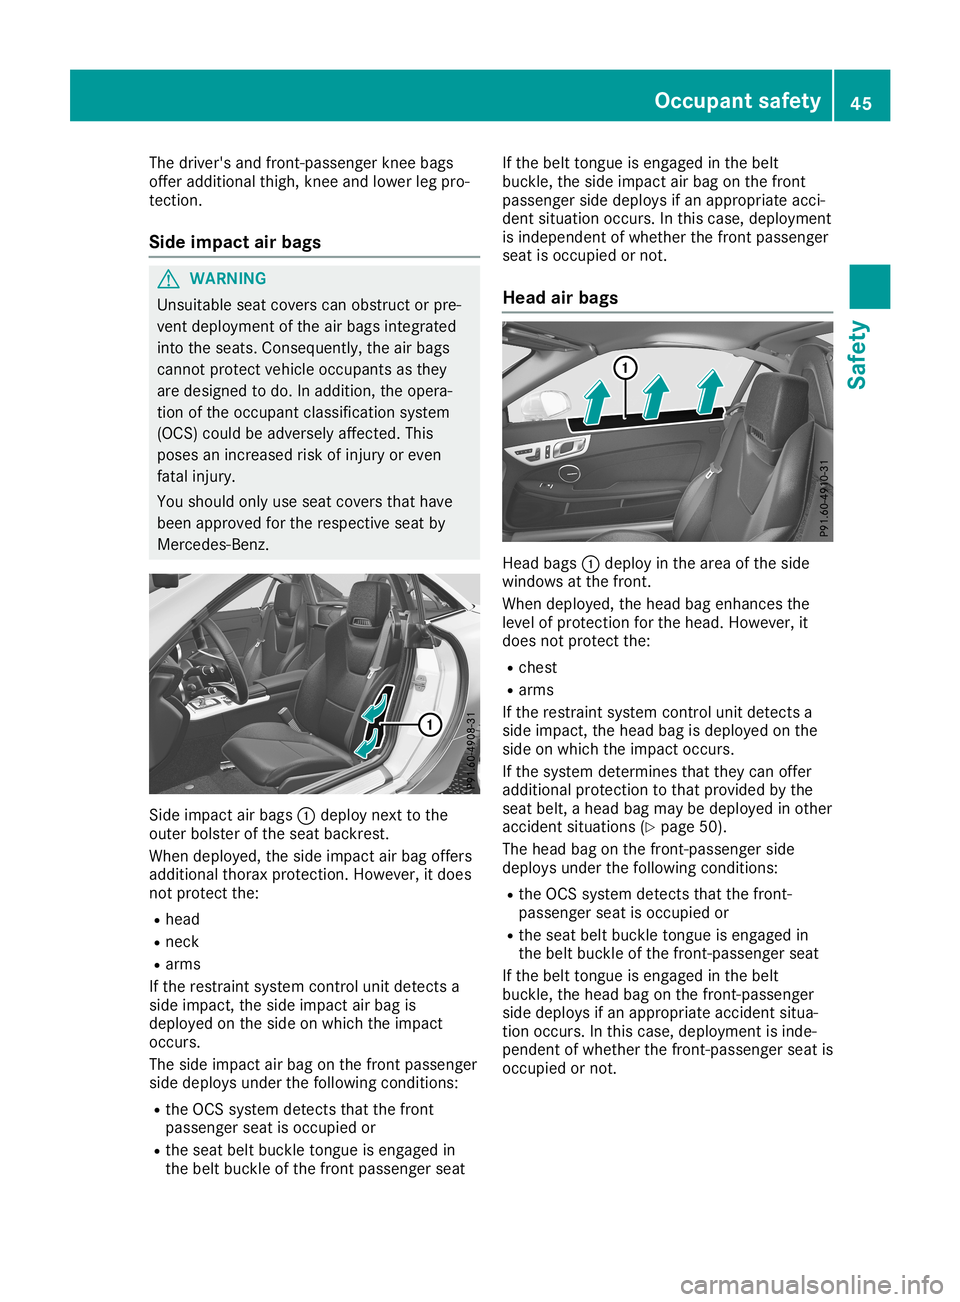 MERCEDES-BENZ SLC ROADSTER 2019 Service Manual The
driver's andfront -passenger kneebags
offer additional thigh,kneeandlower legpro-
tect ion.
Side impa ctair bags G
WARNIN
G
Unsuitable seatcovers canobstruct orpre-
vent deployment ofthe airba